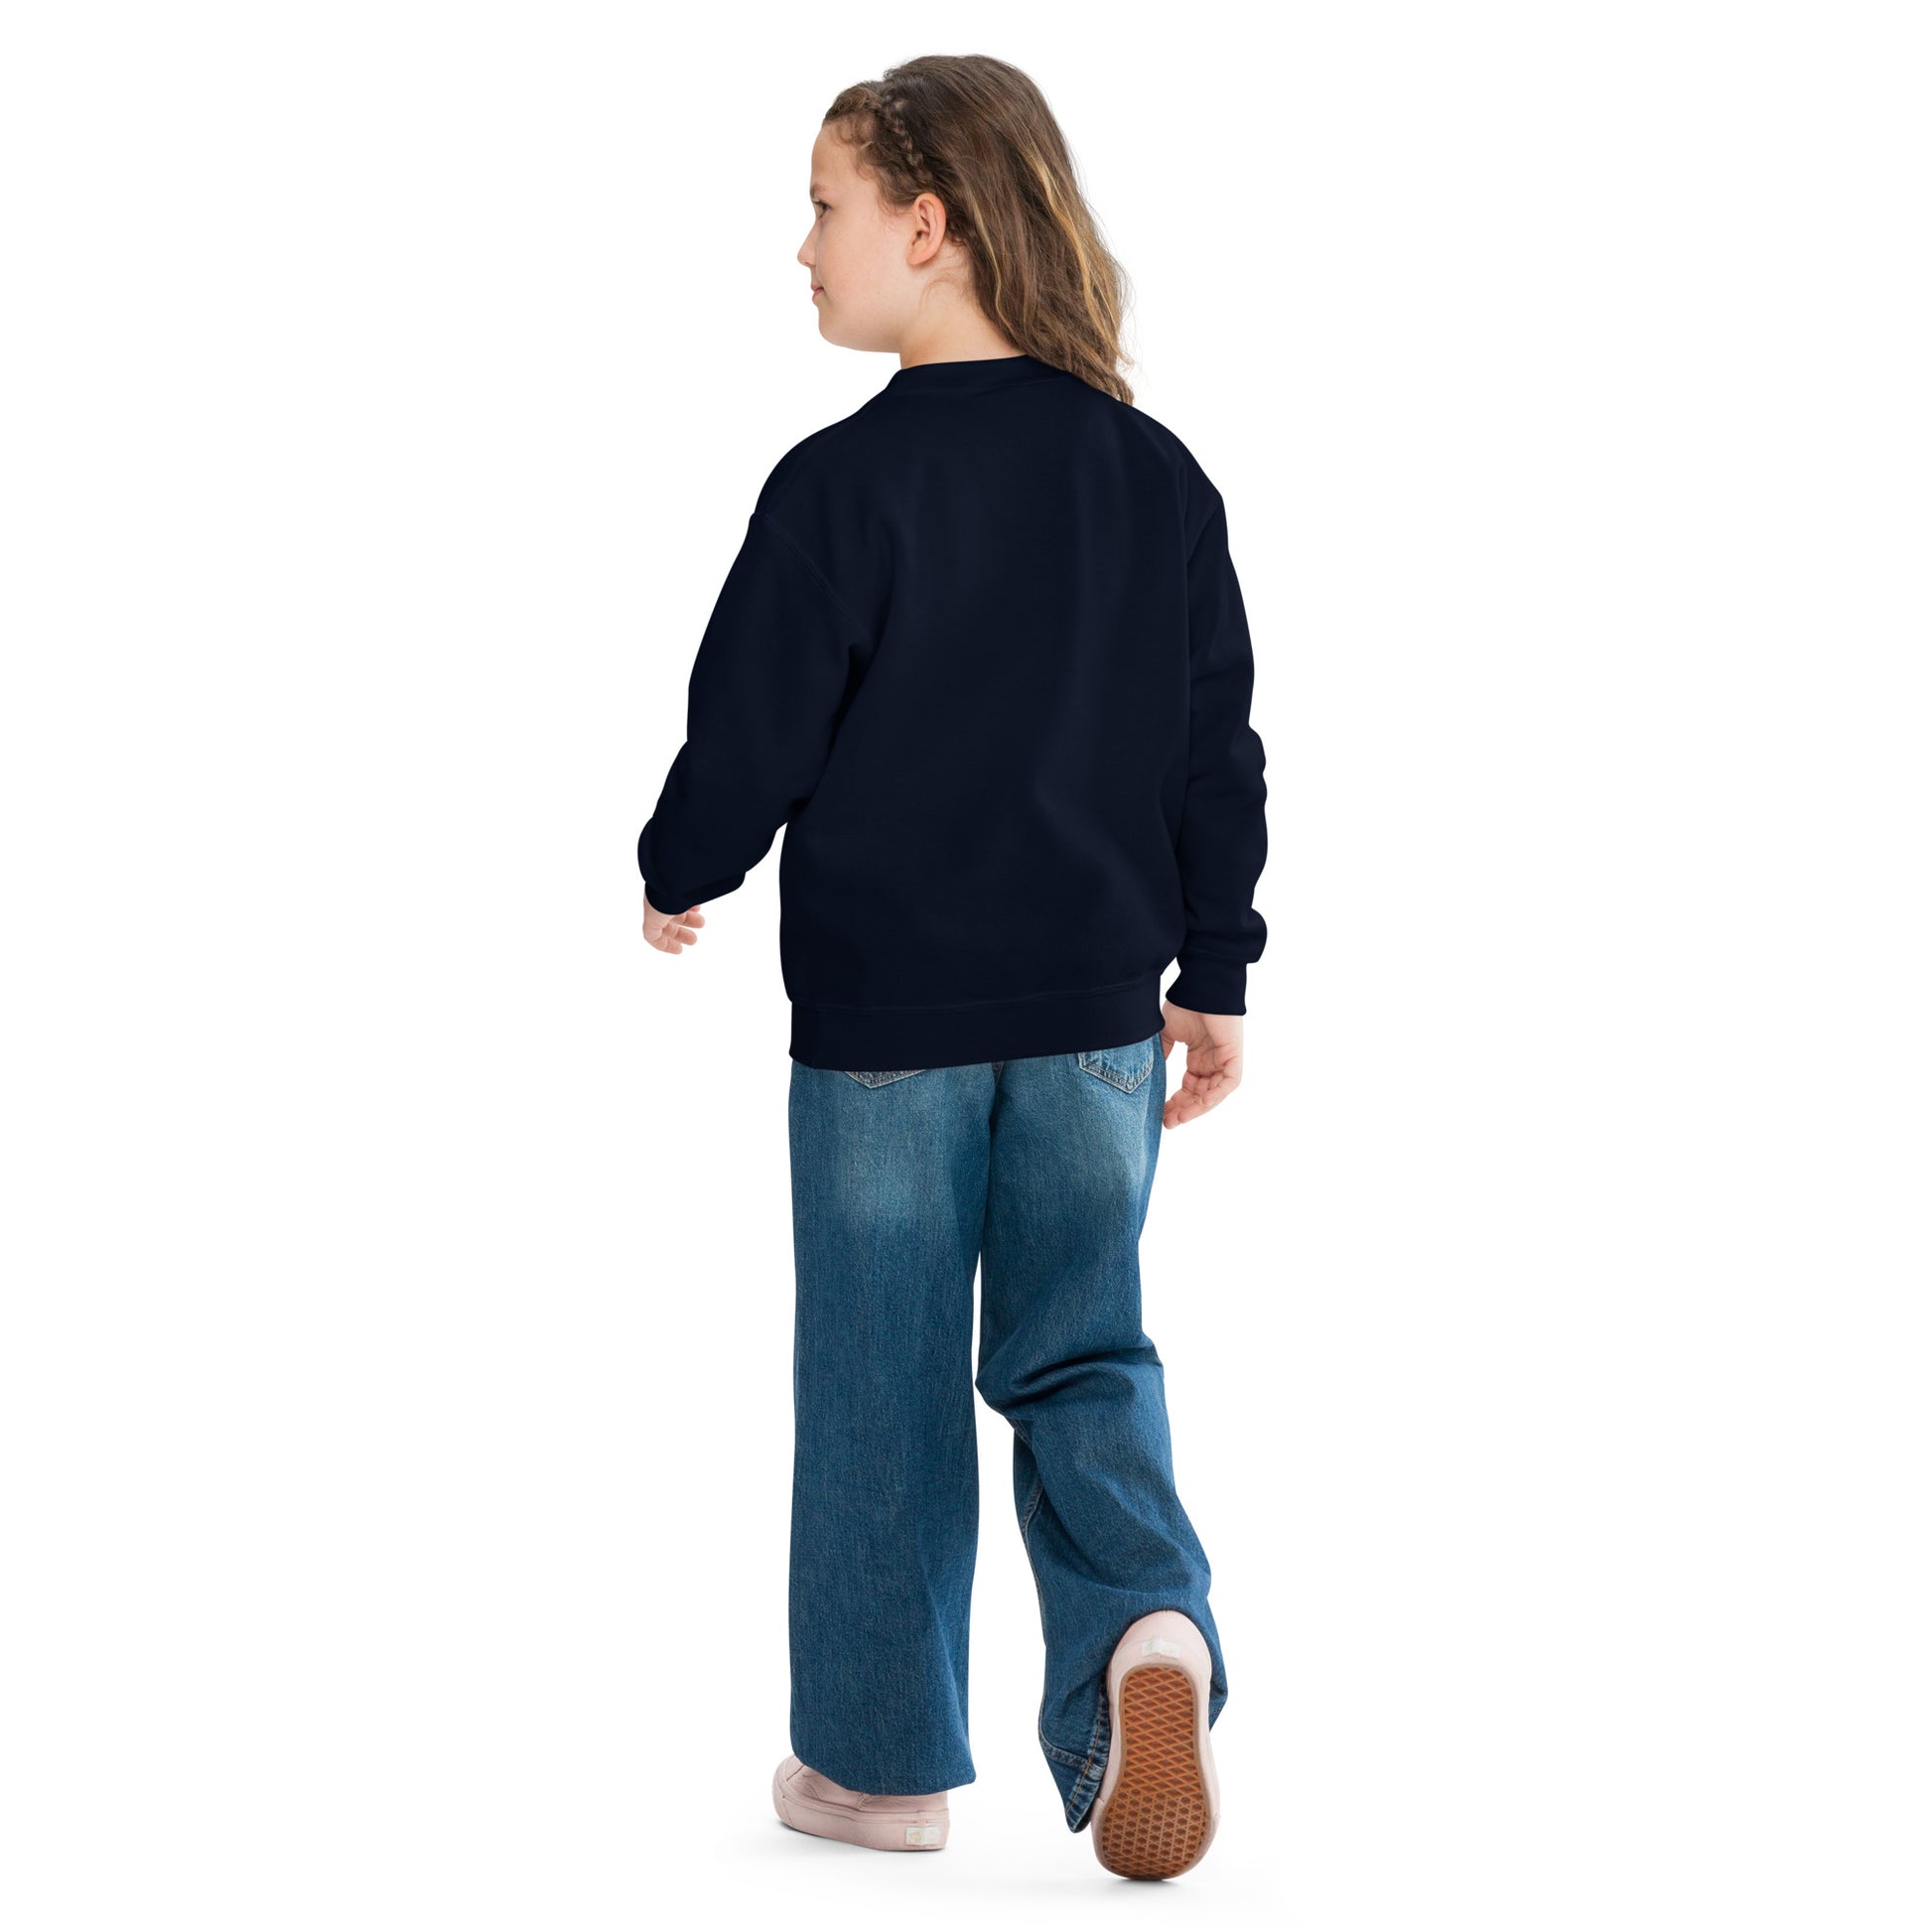 a little girl wearing a black sweatshirt and jeans